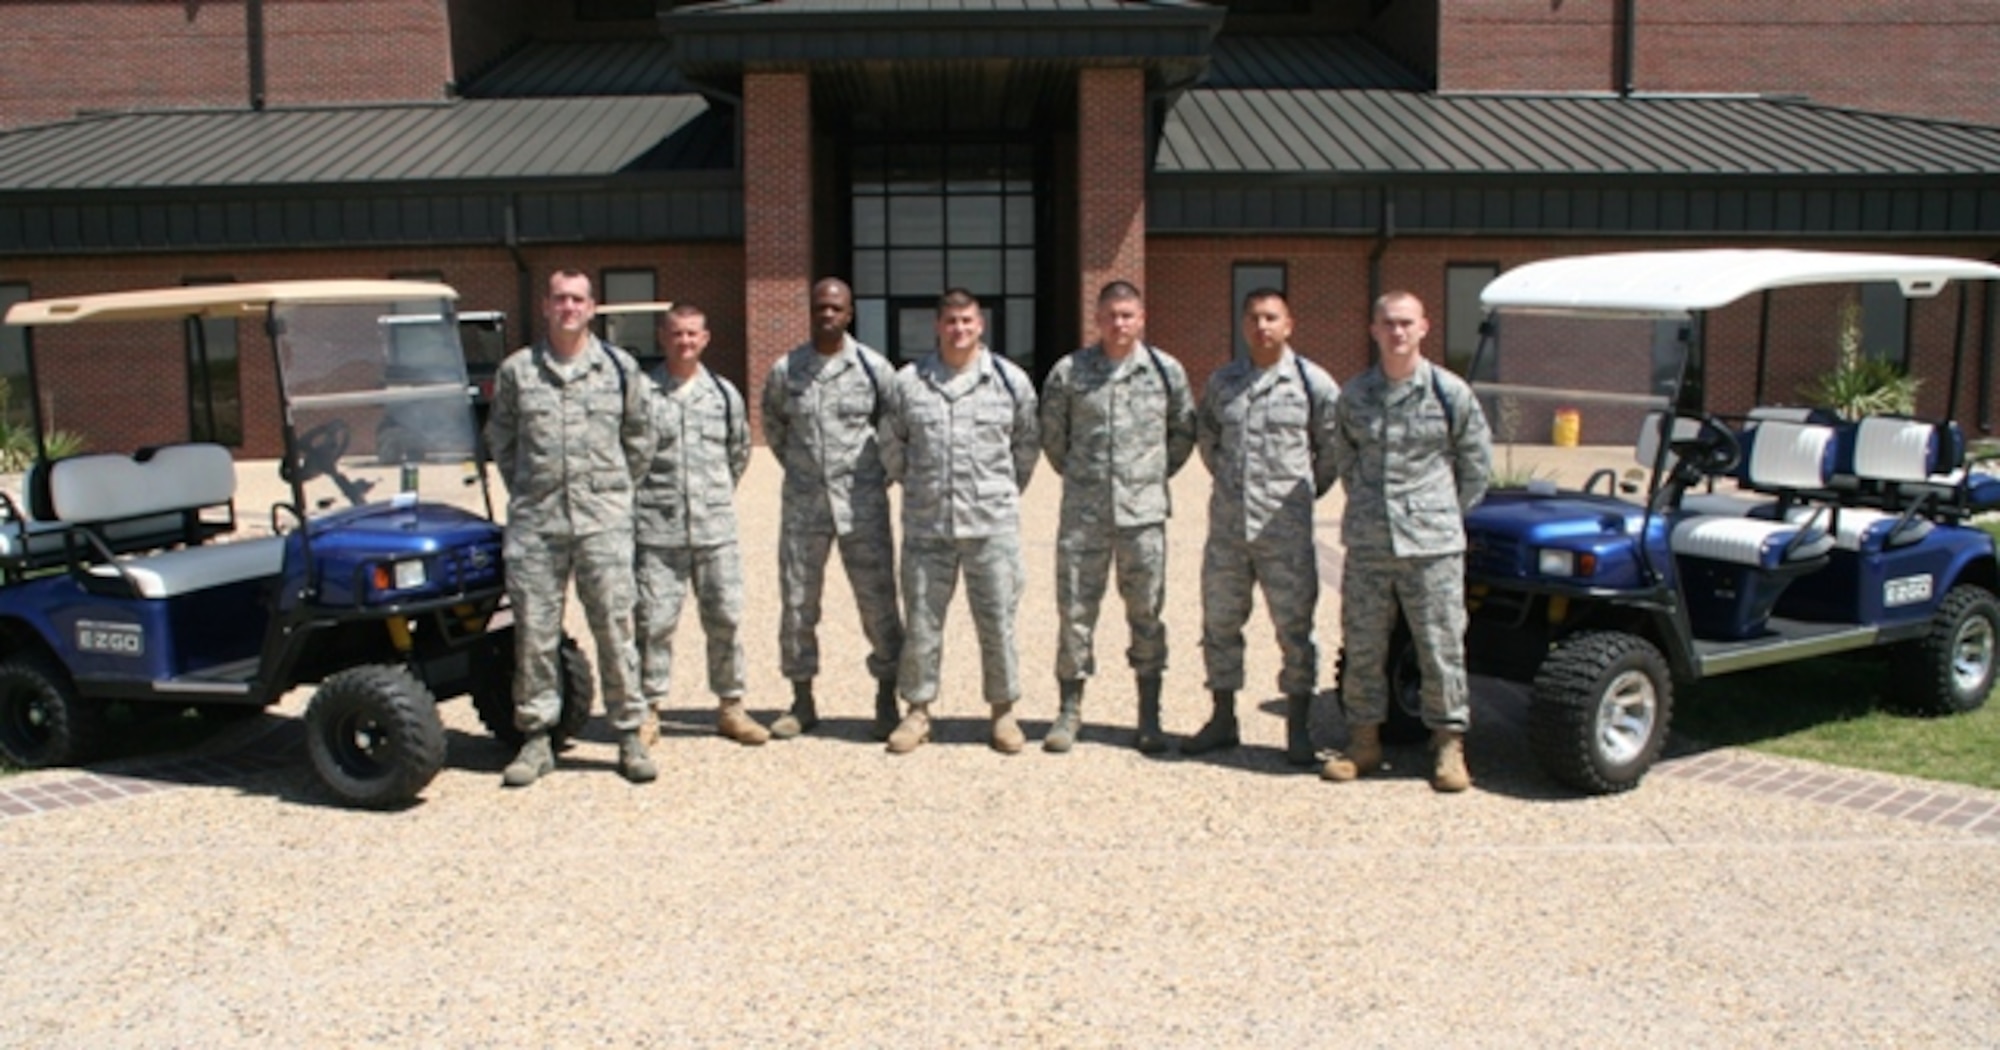 Military Training Leaders provide solid groundwork that help our professional Airmen become successful. MTLs from the 316th Training Squadron are (from left): Staff Sgt. Barack Heaney, Staff Sgt. Glenn Burnett, Tech. Sgt. Jonathan Session, Staff Sgt. John Otero, Staff Sgt. Randal Brooks, Staff Sgt. Raynaldo Carrasco and Staff Sgt. James Davison. (U.S. Air Force photo)